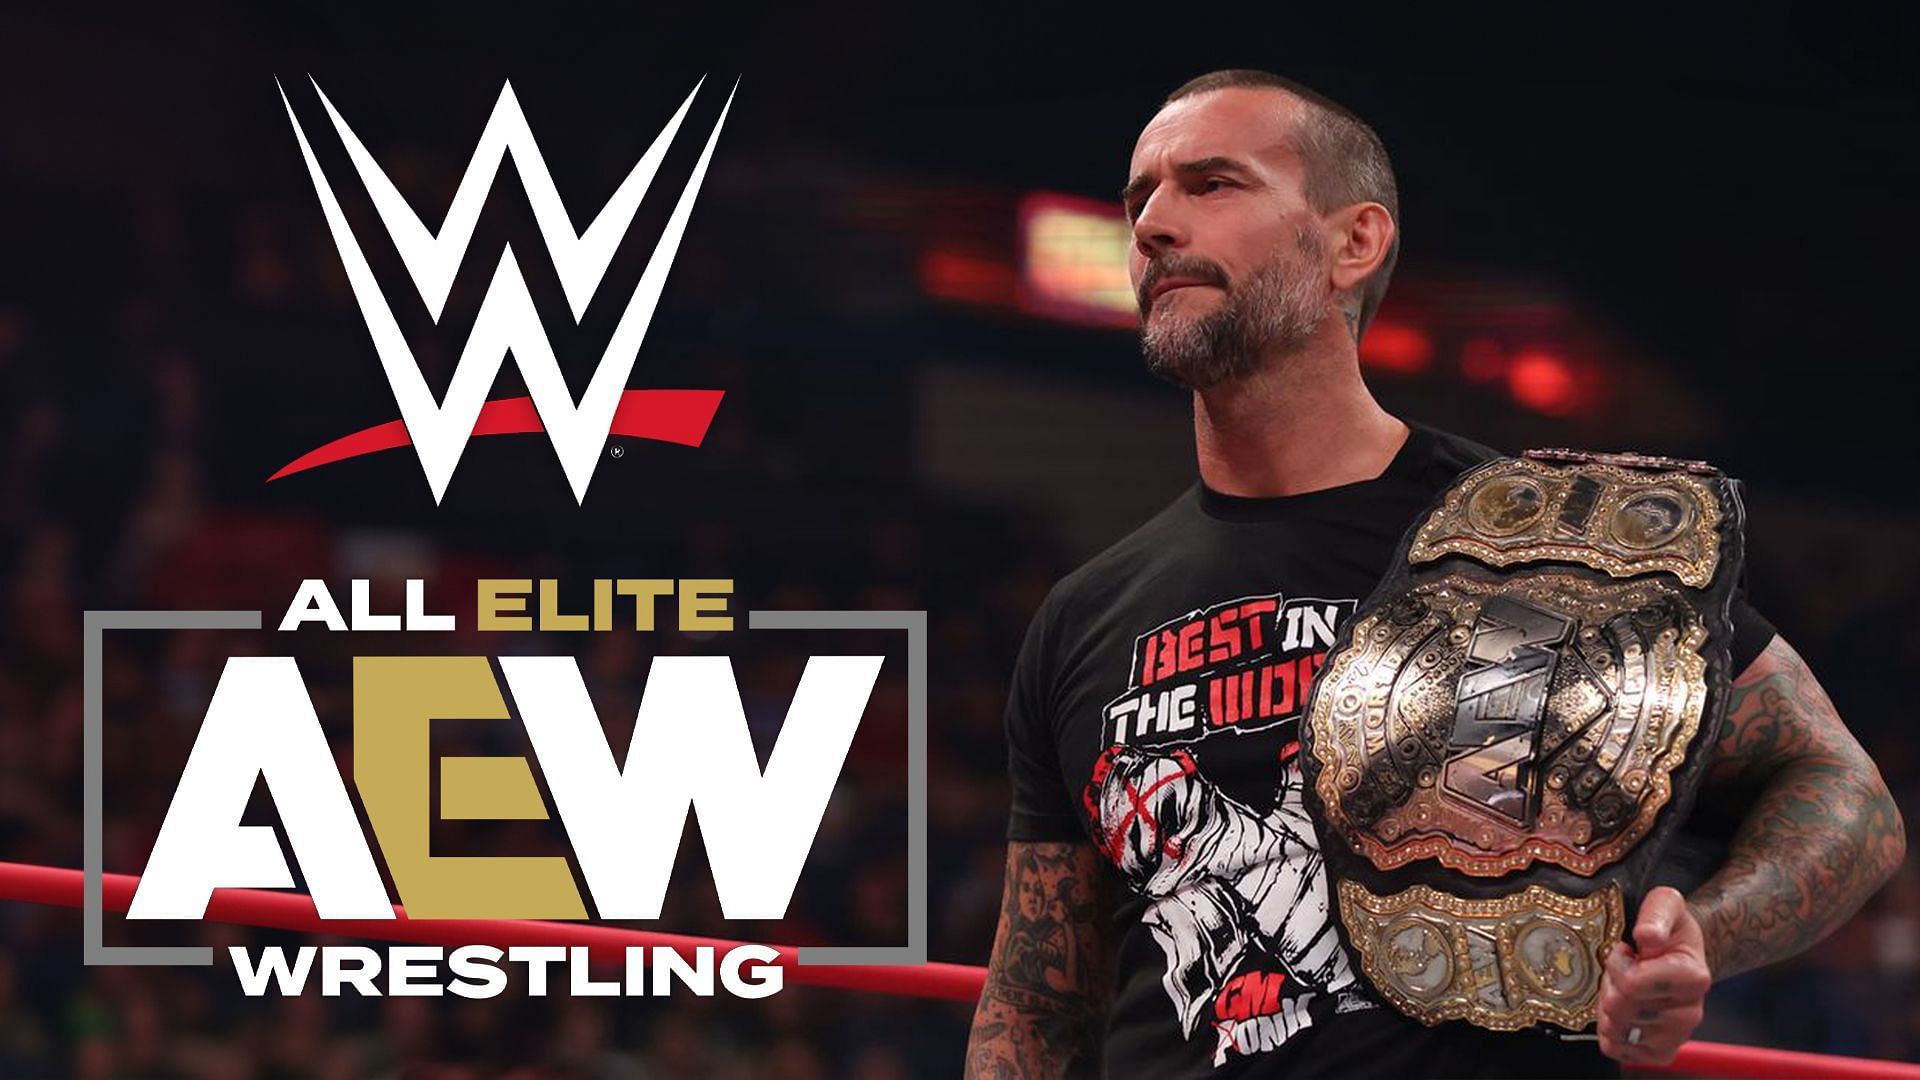 FINALLY, AEW's answer to WWE's CM Punk teases - Fans react to